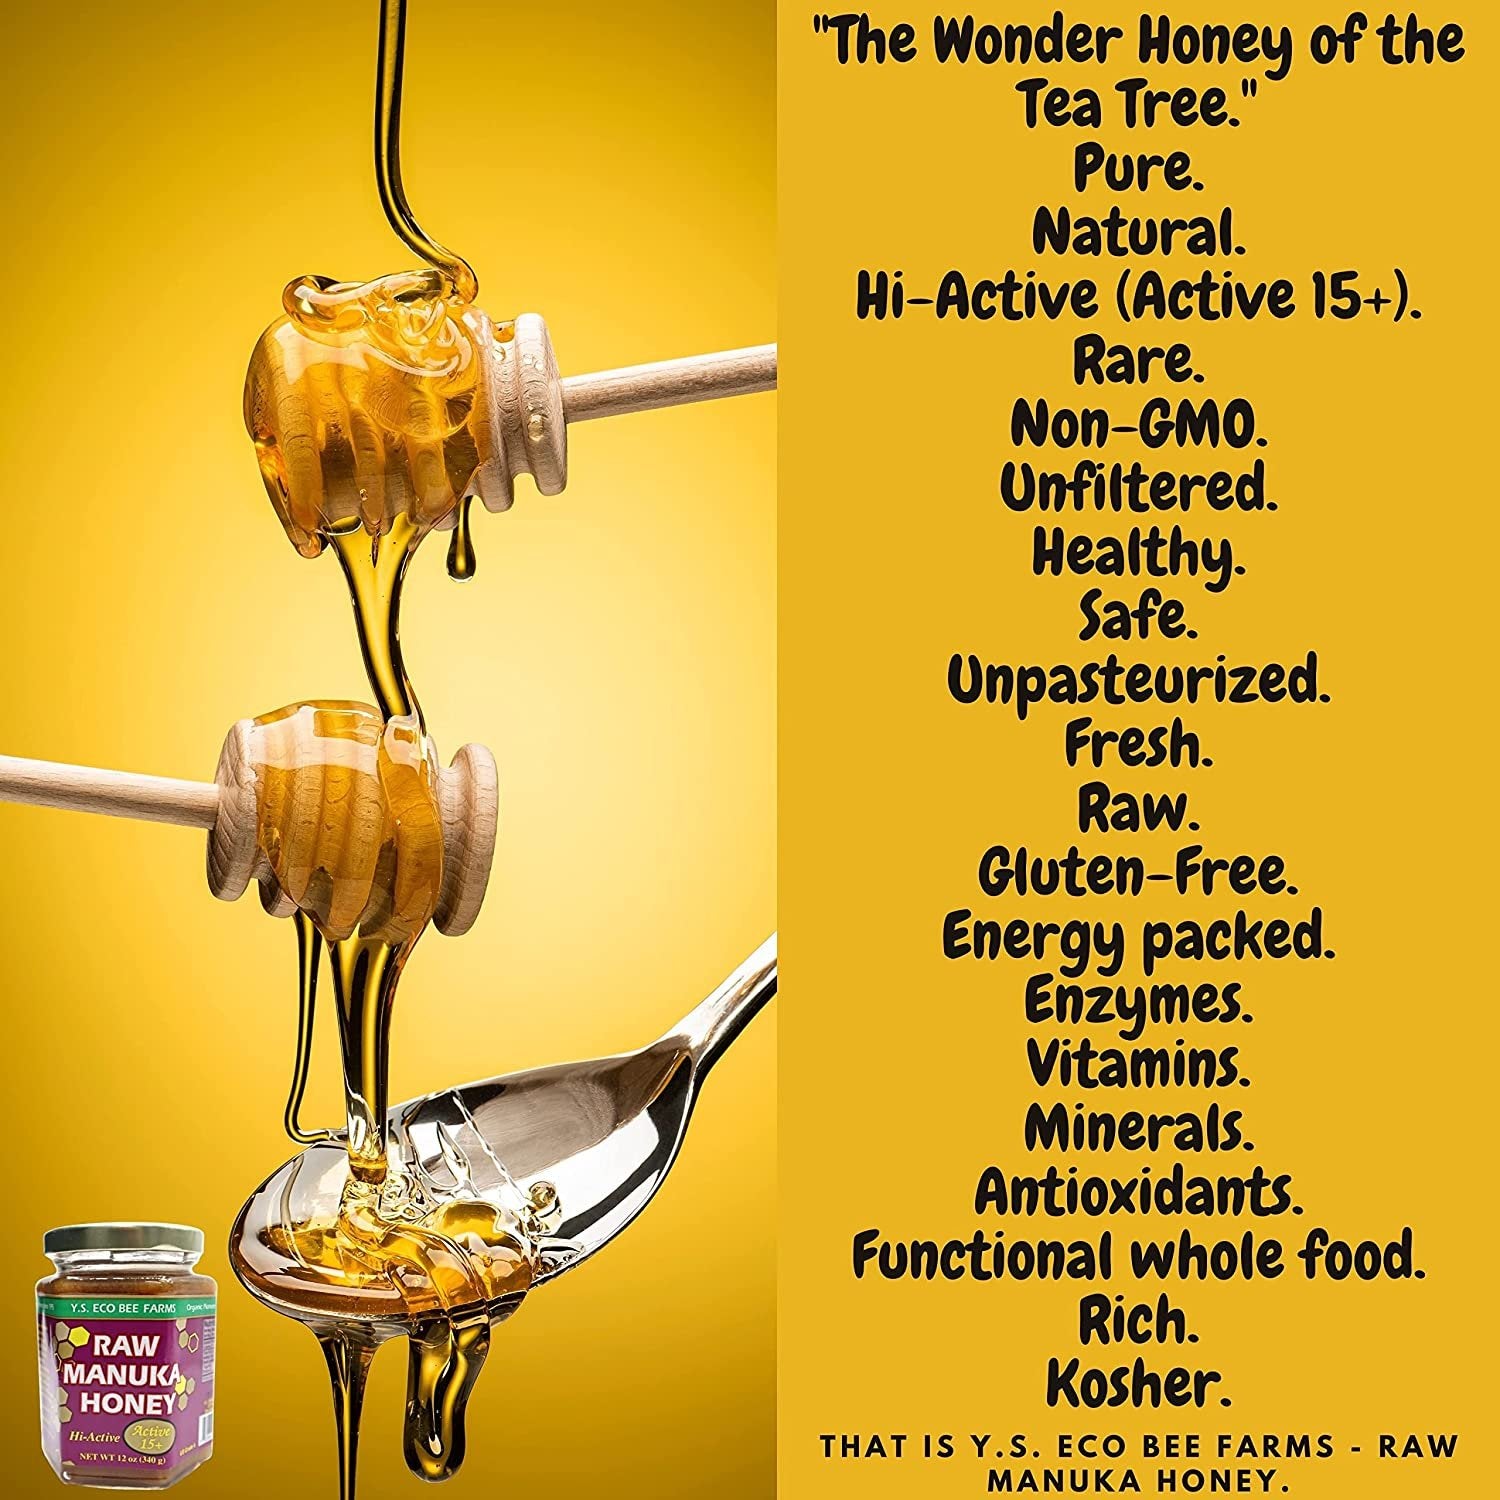 Y.S. Eco Bee Farms, 100% Certified Raw Manuka Honey, Hi-Active, Active 15plus, Unpasteurized, Unfiltered, Rare, Exotic, Raw, Kosher, Gluten Free, "The Wonder Honey Of The Tea Tree", 12 Oz - 6 Jars